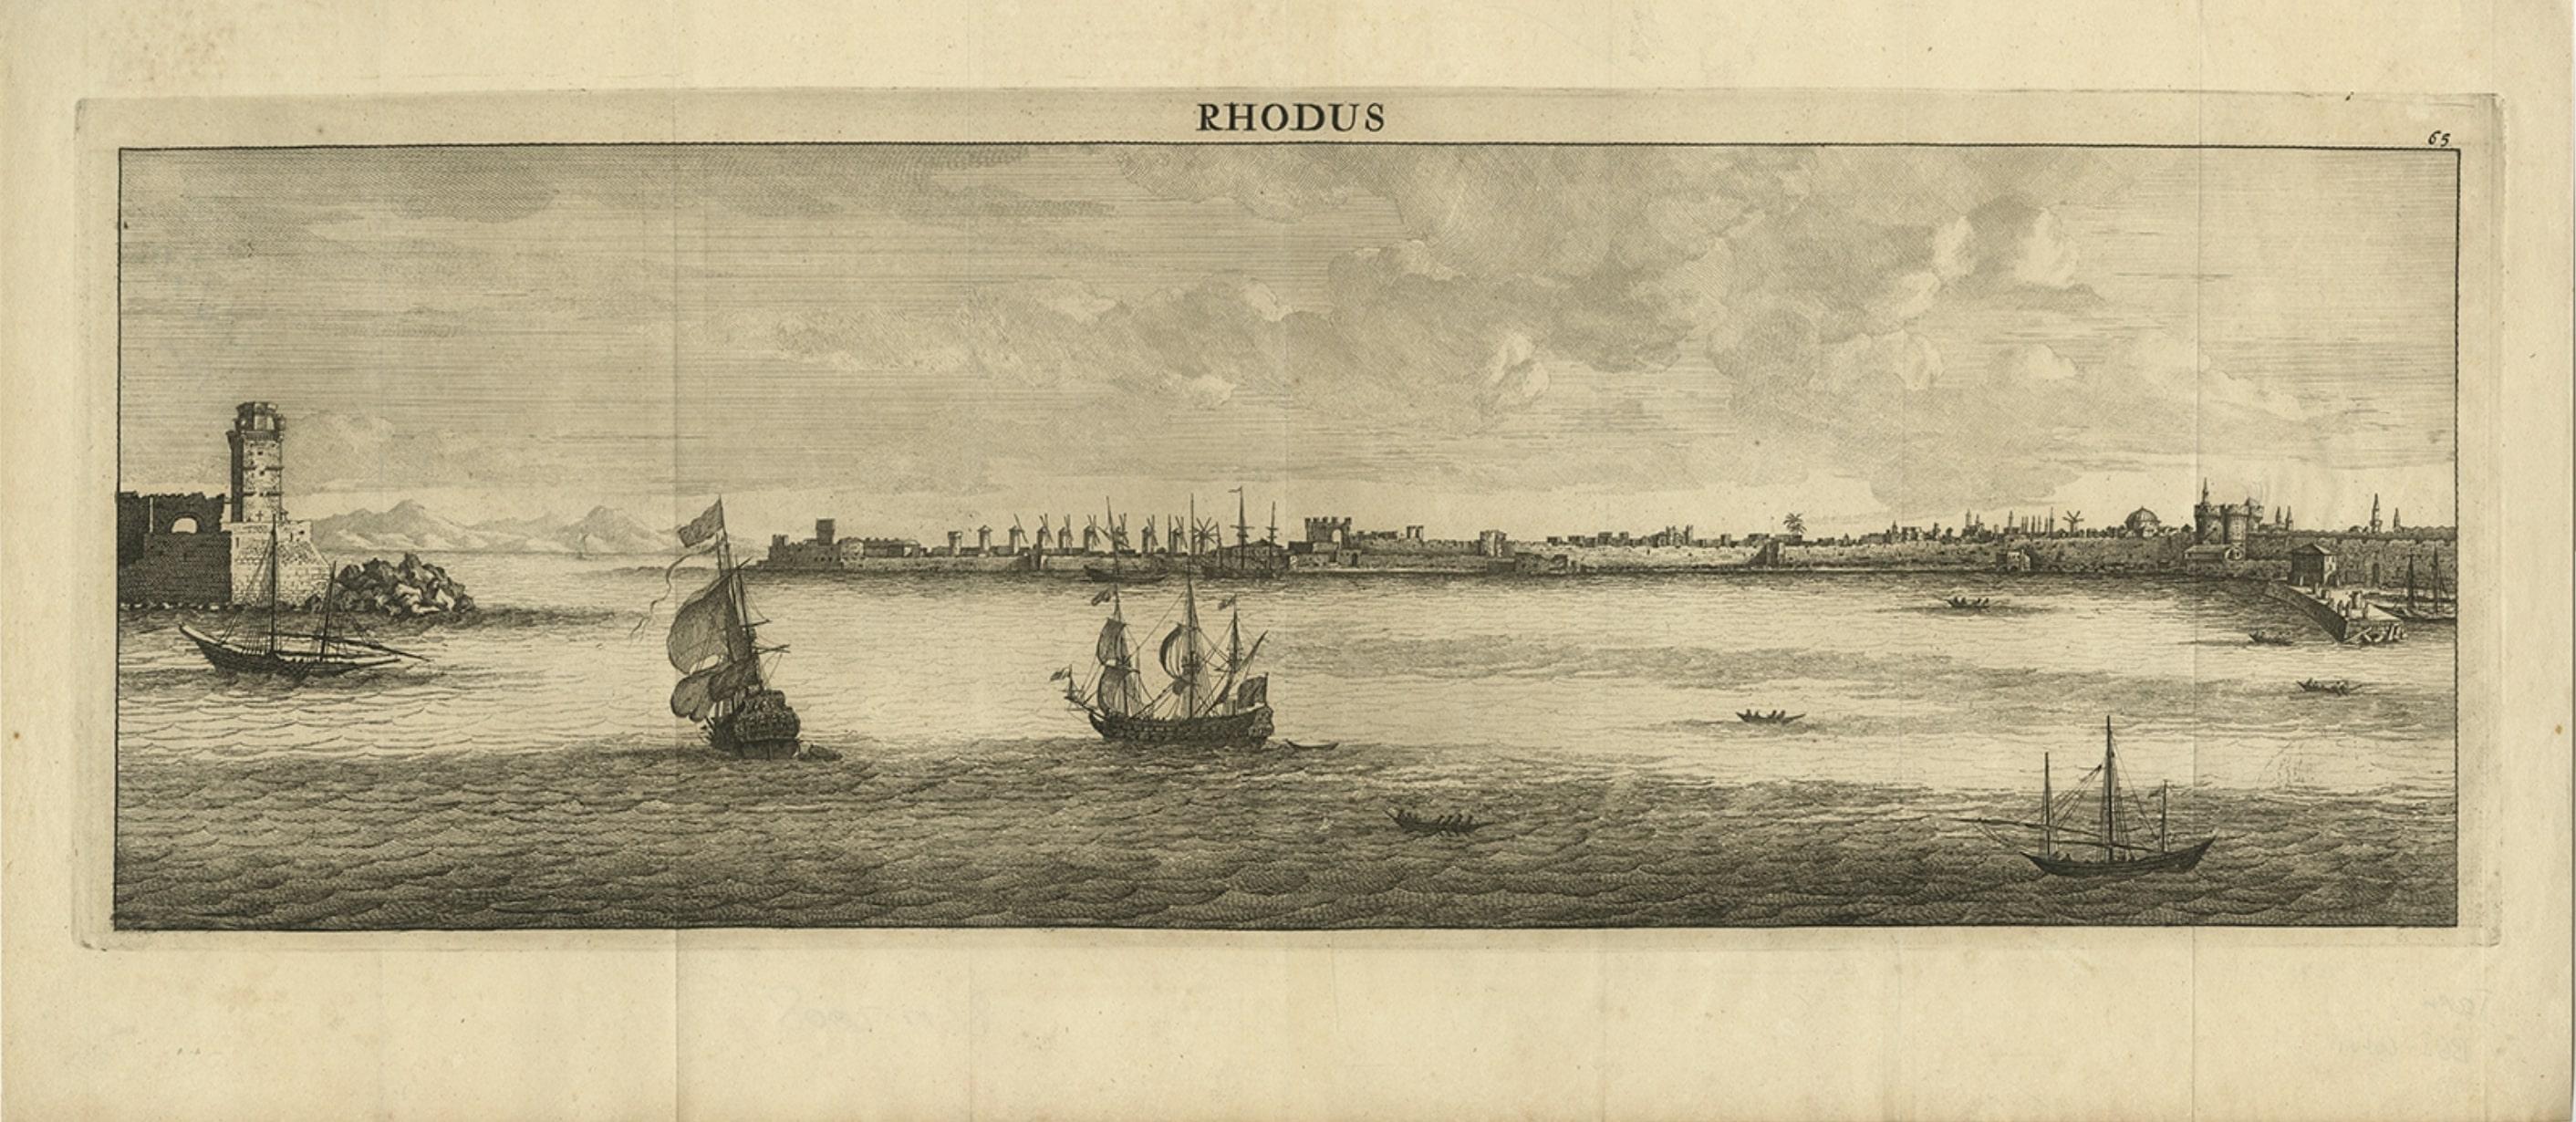 Late 17th Century Beautiful View of the Island of Rhodes, Greece, depicting the Old Town with Fort For Sale